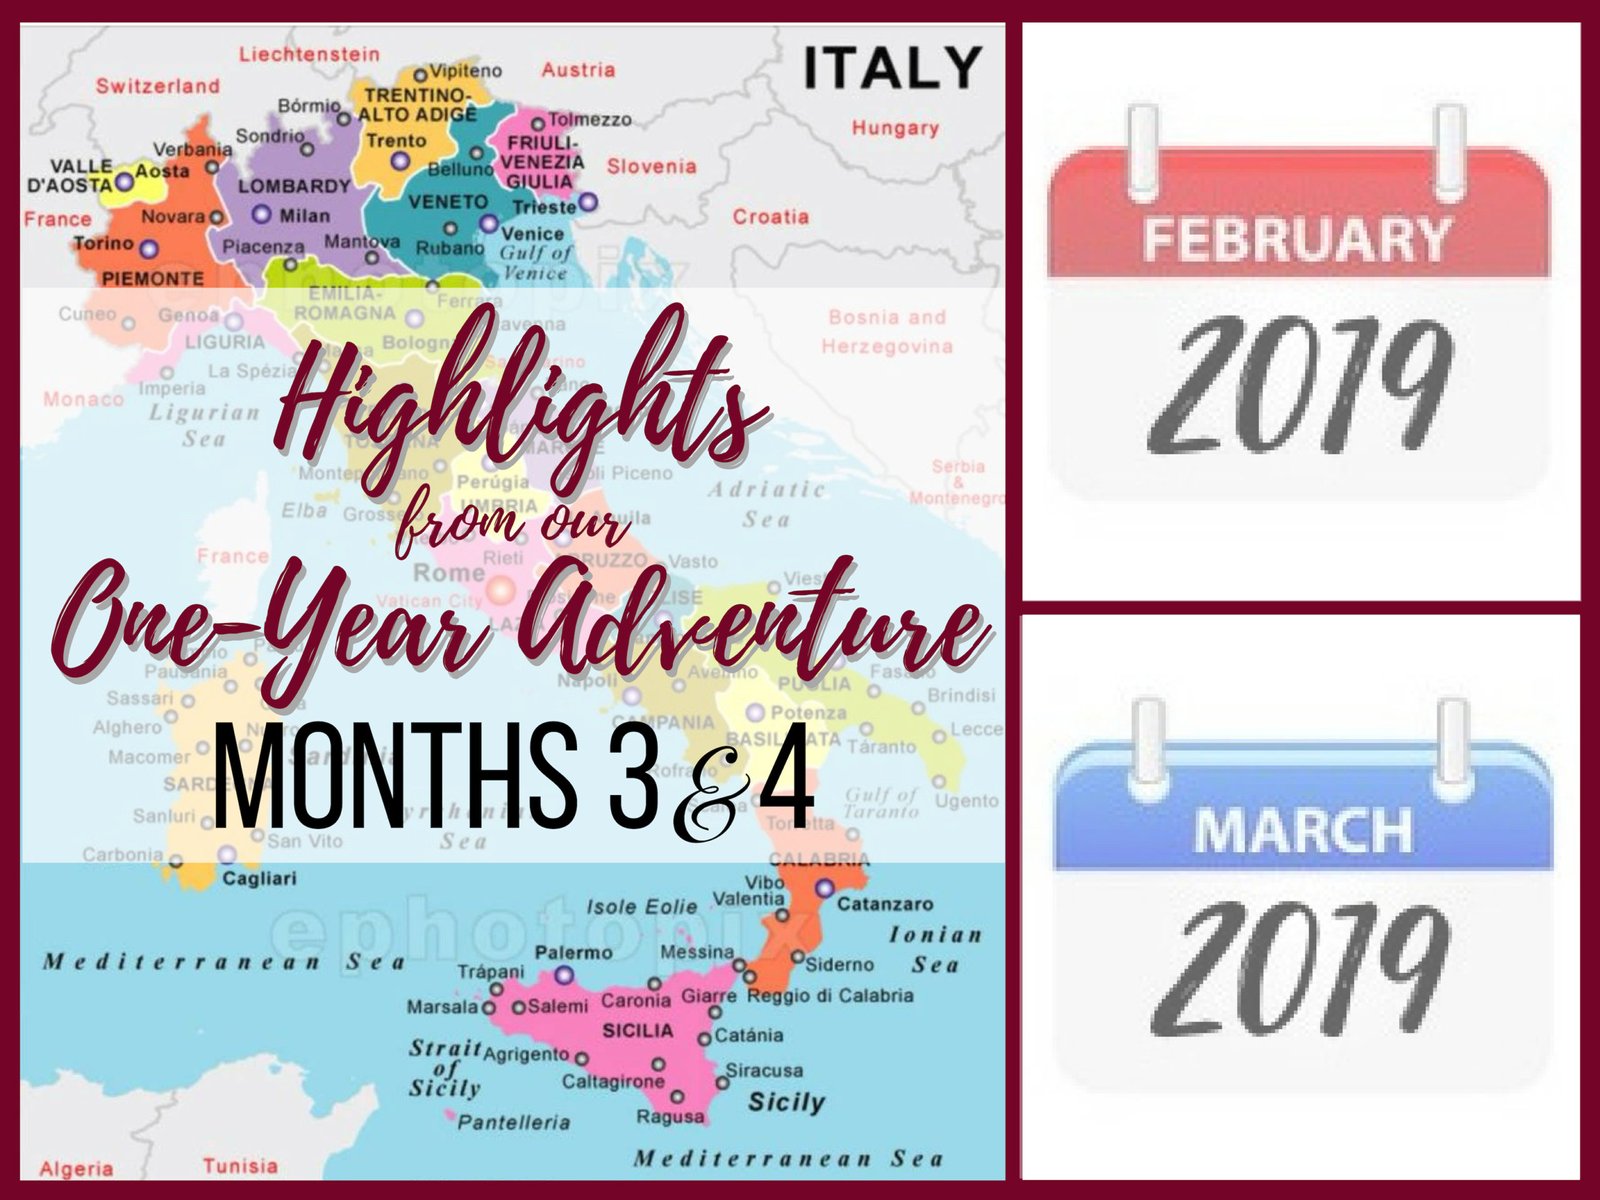 our one-year adventure through Italy, months 3 & 4, ouritalianjourney.com